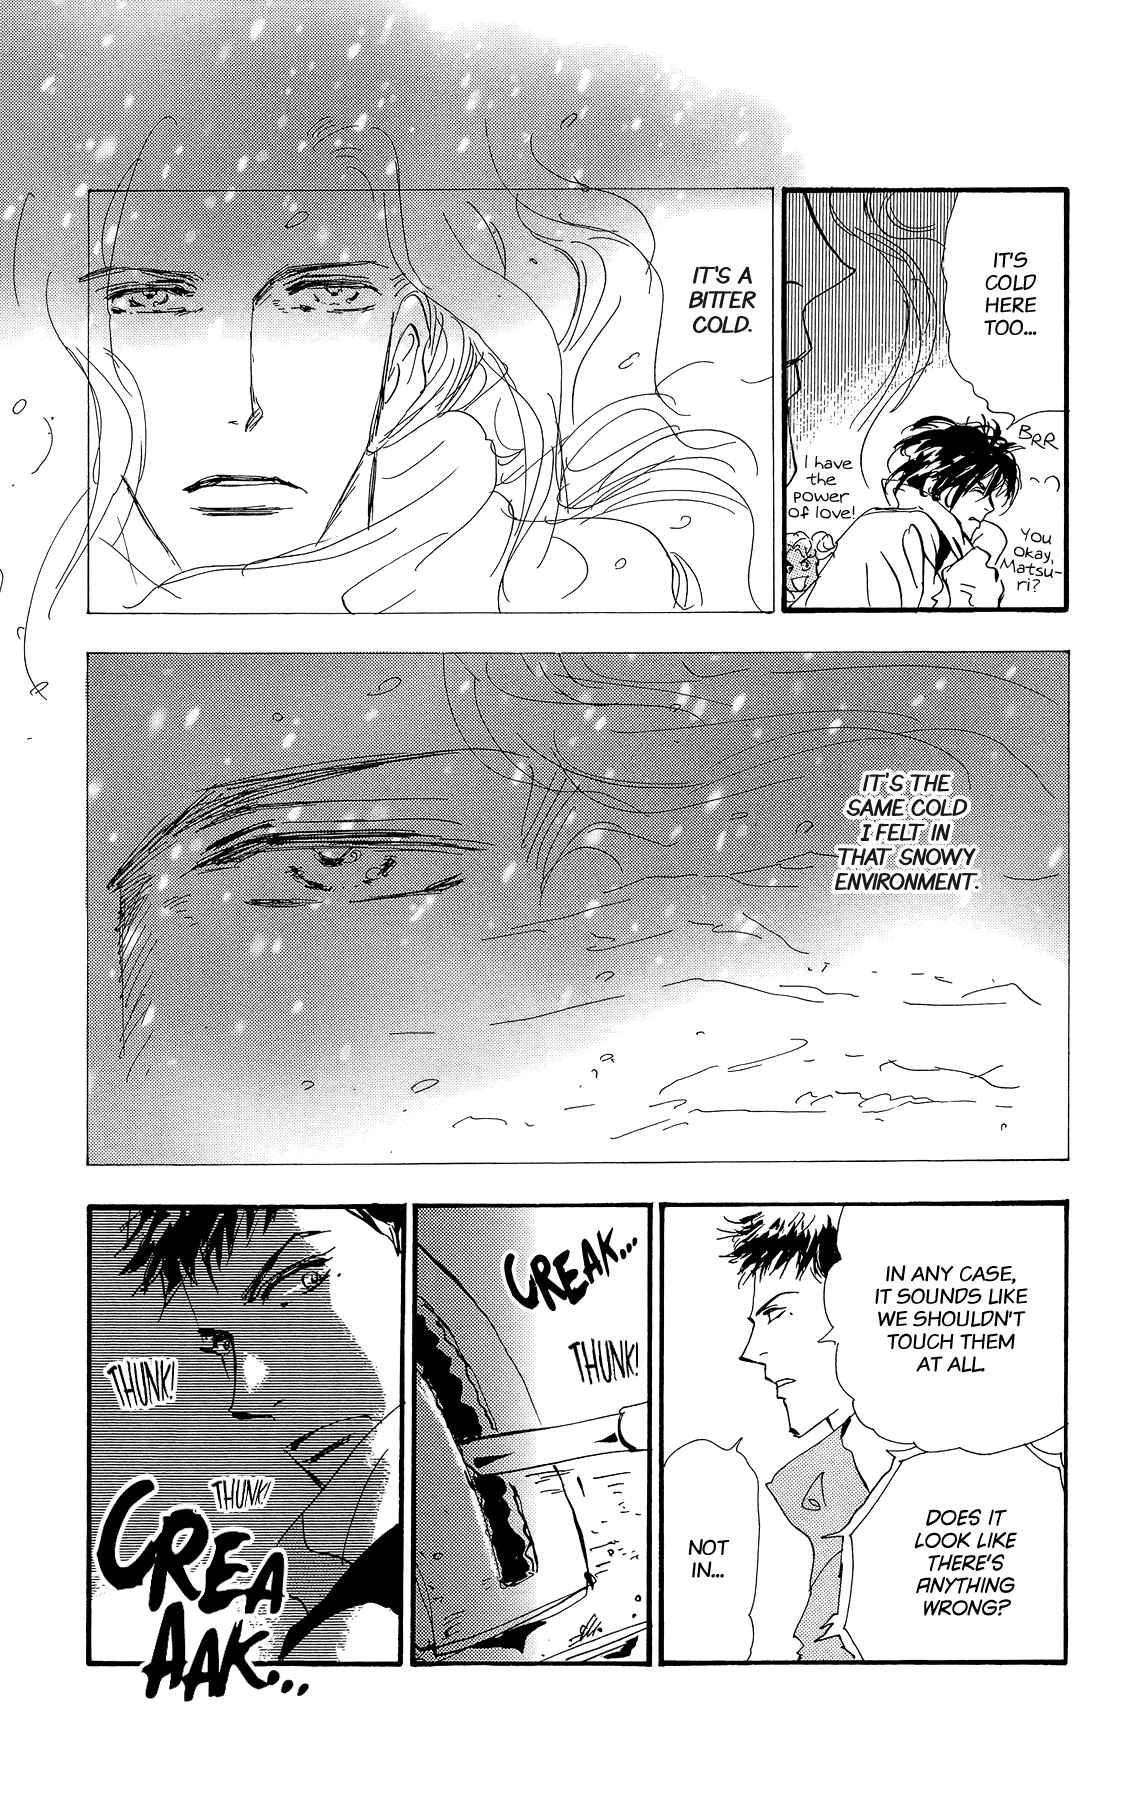 7 Seeds Vol. 32 Ch. 164 Sky Chapter 1 [Bitter Cold]